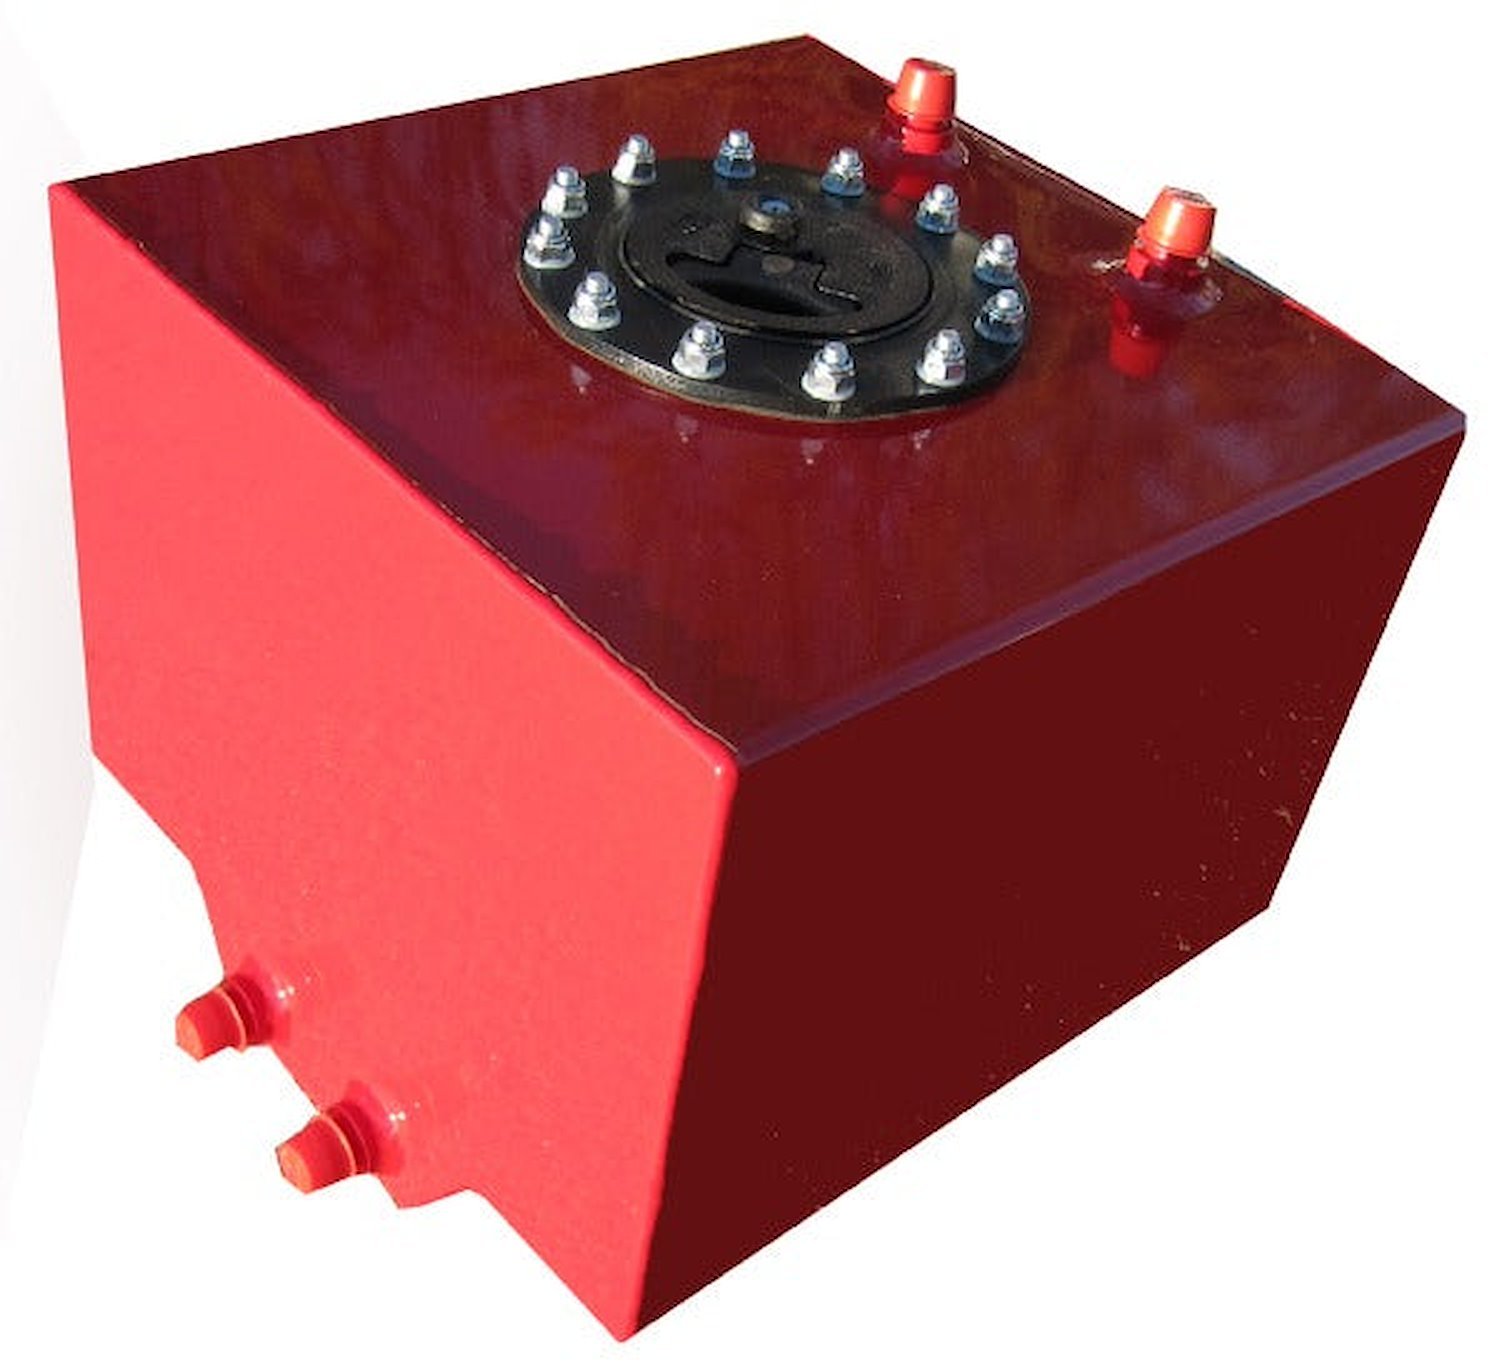 2050AB Aluminum Fuel Cell, 5-Gallon, Red Powder Coated